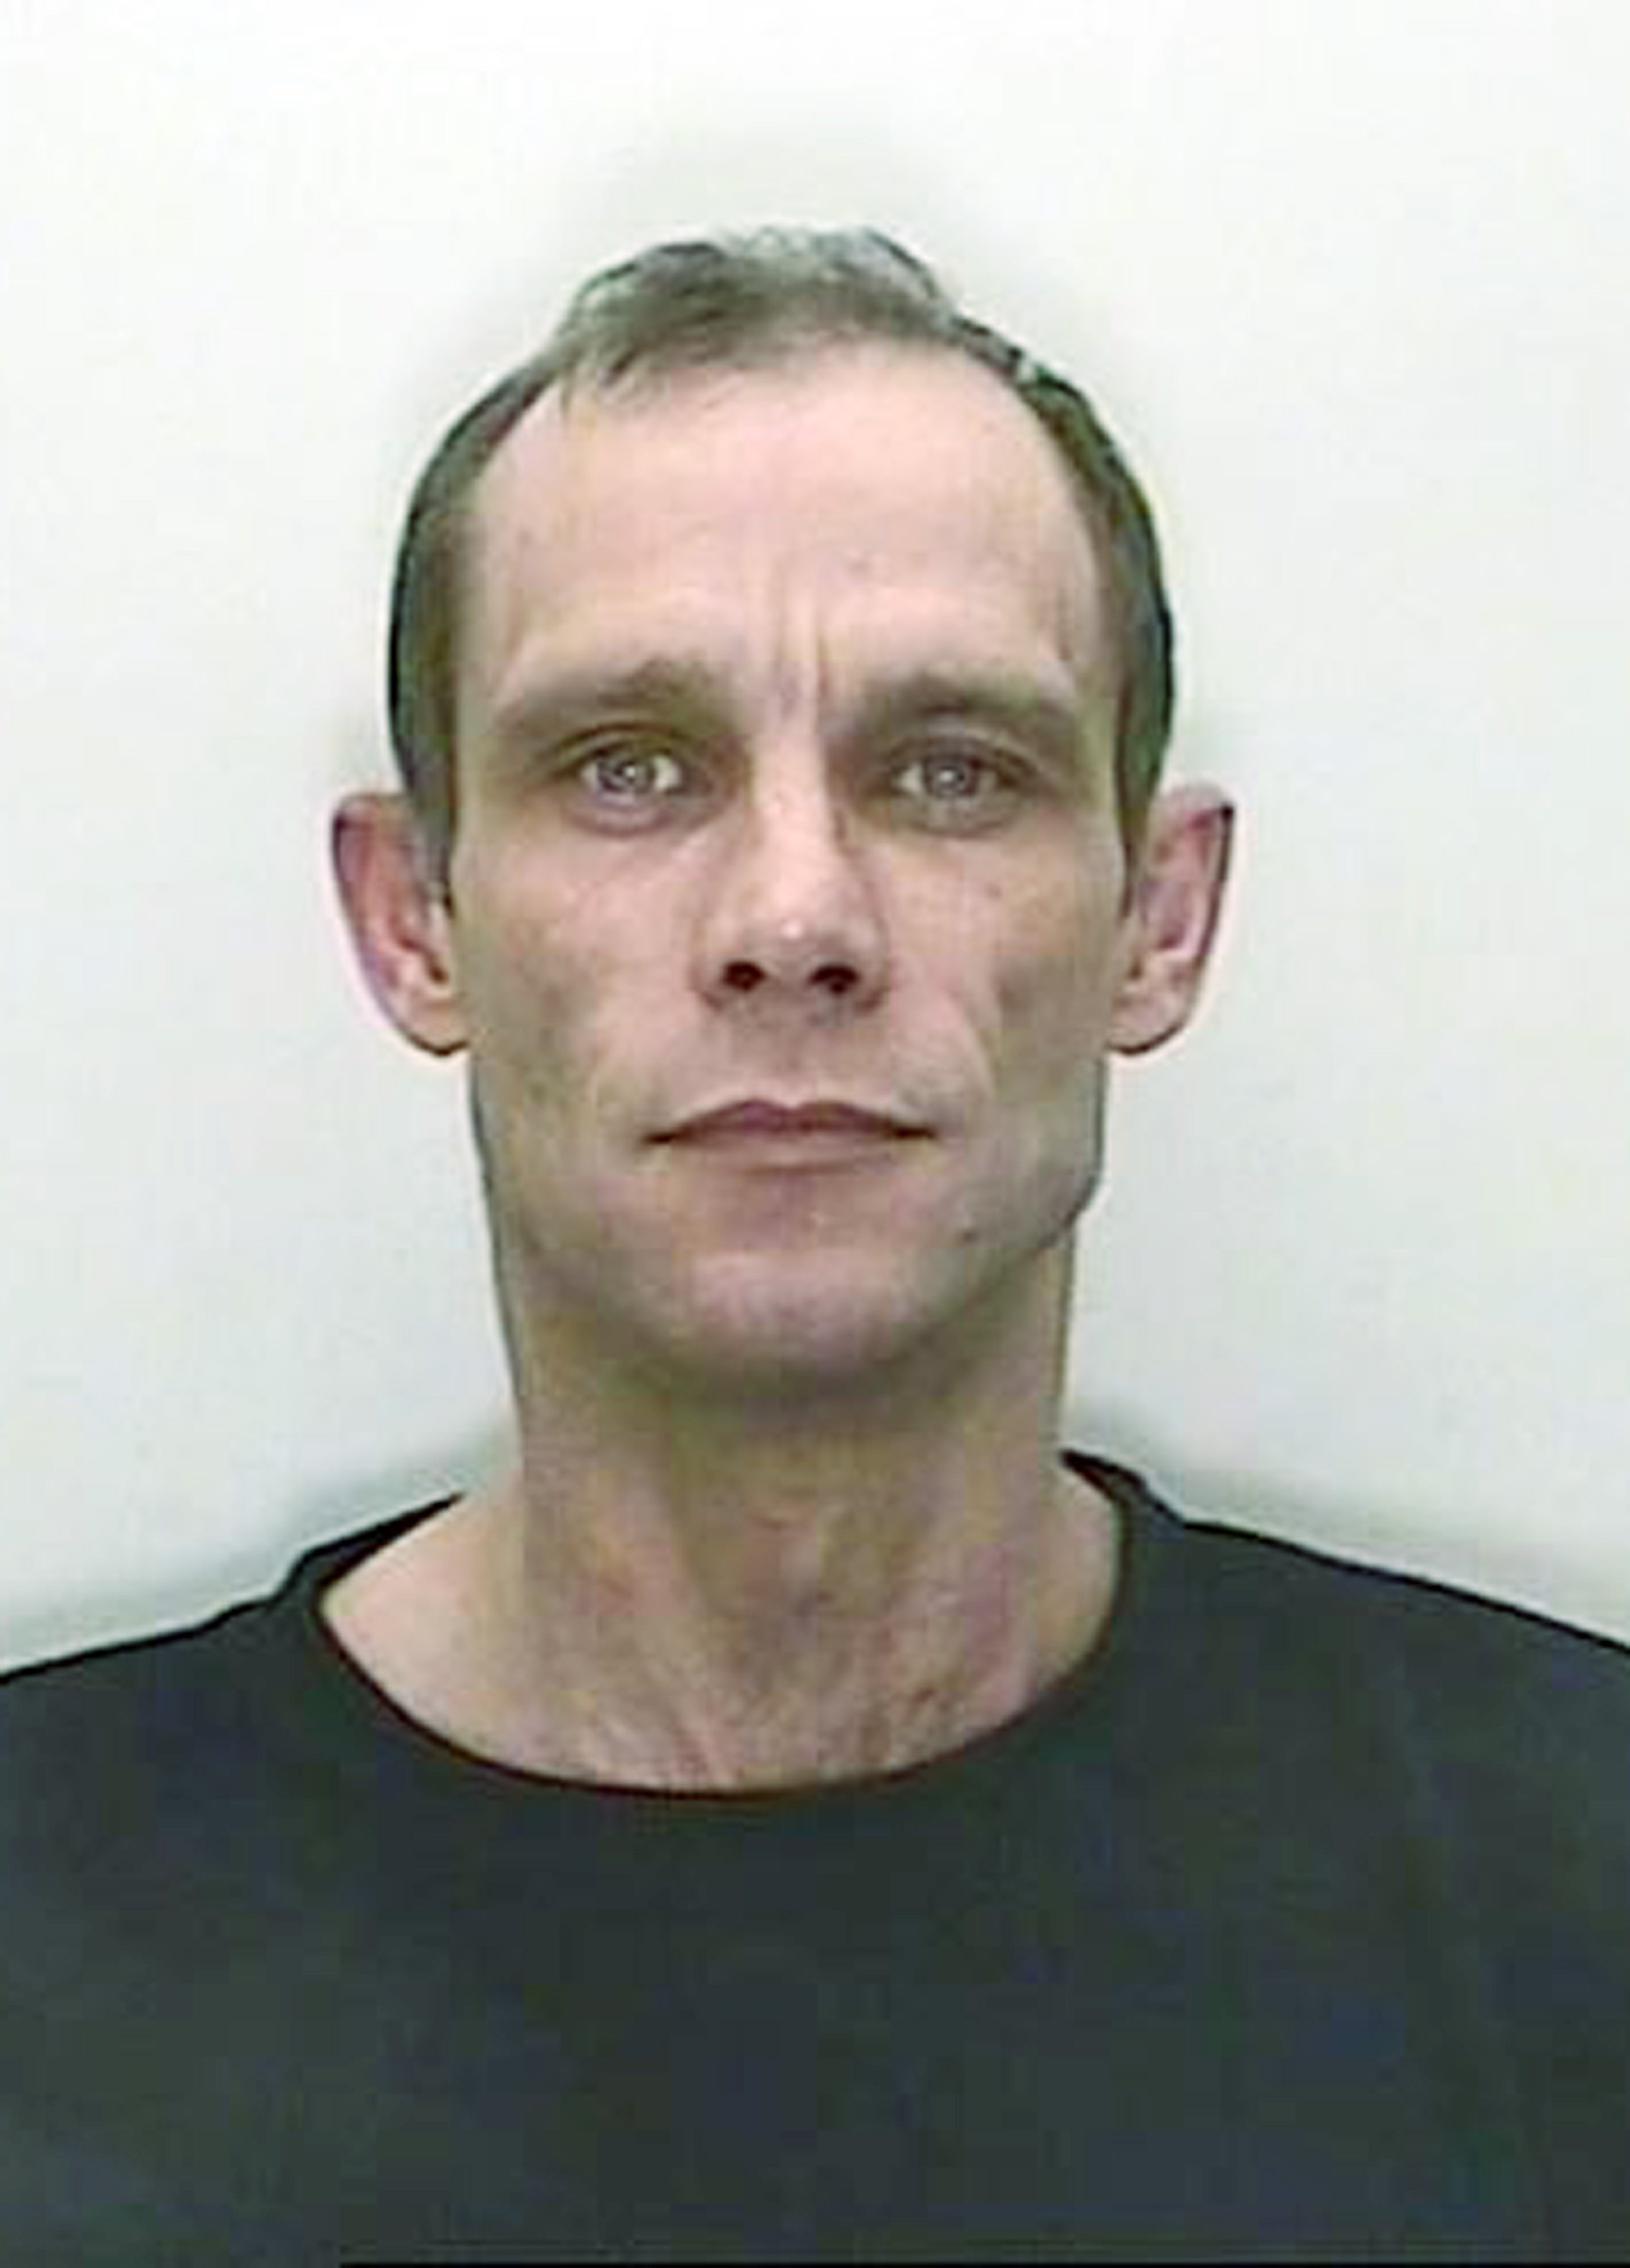 Christopher Halliwell confessed to the murder of Becky Godden in 2011, but was not prosecuted until 2016 (Wiltshire Police/PA)